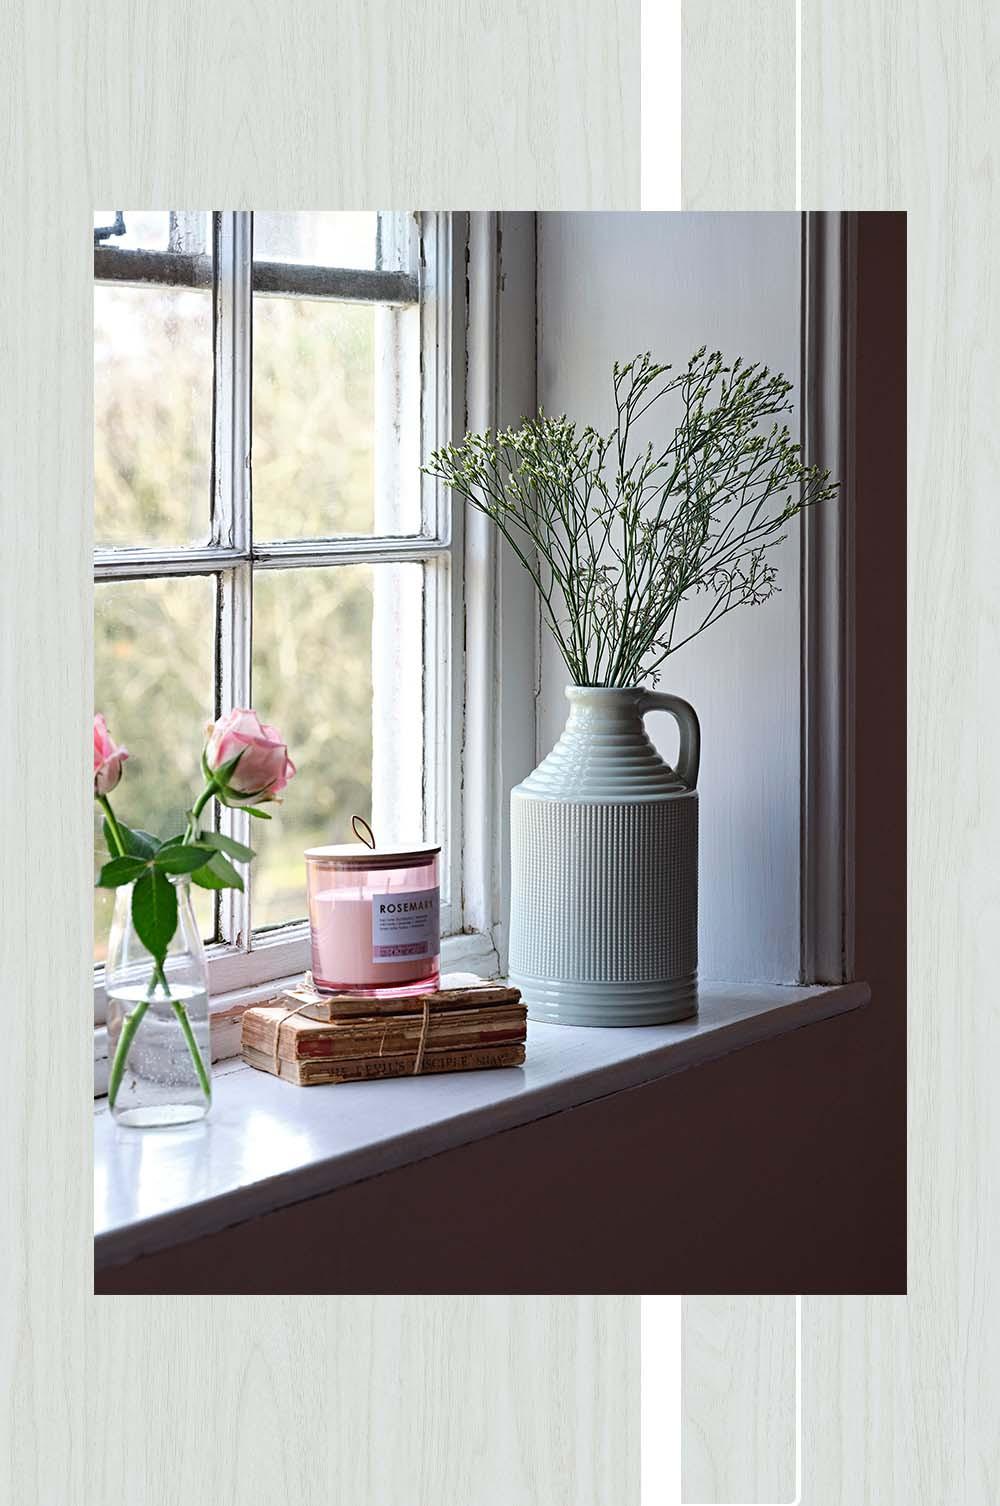 Candles and Vases on windowsill